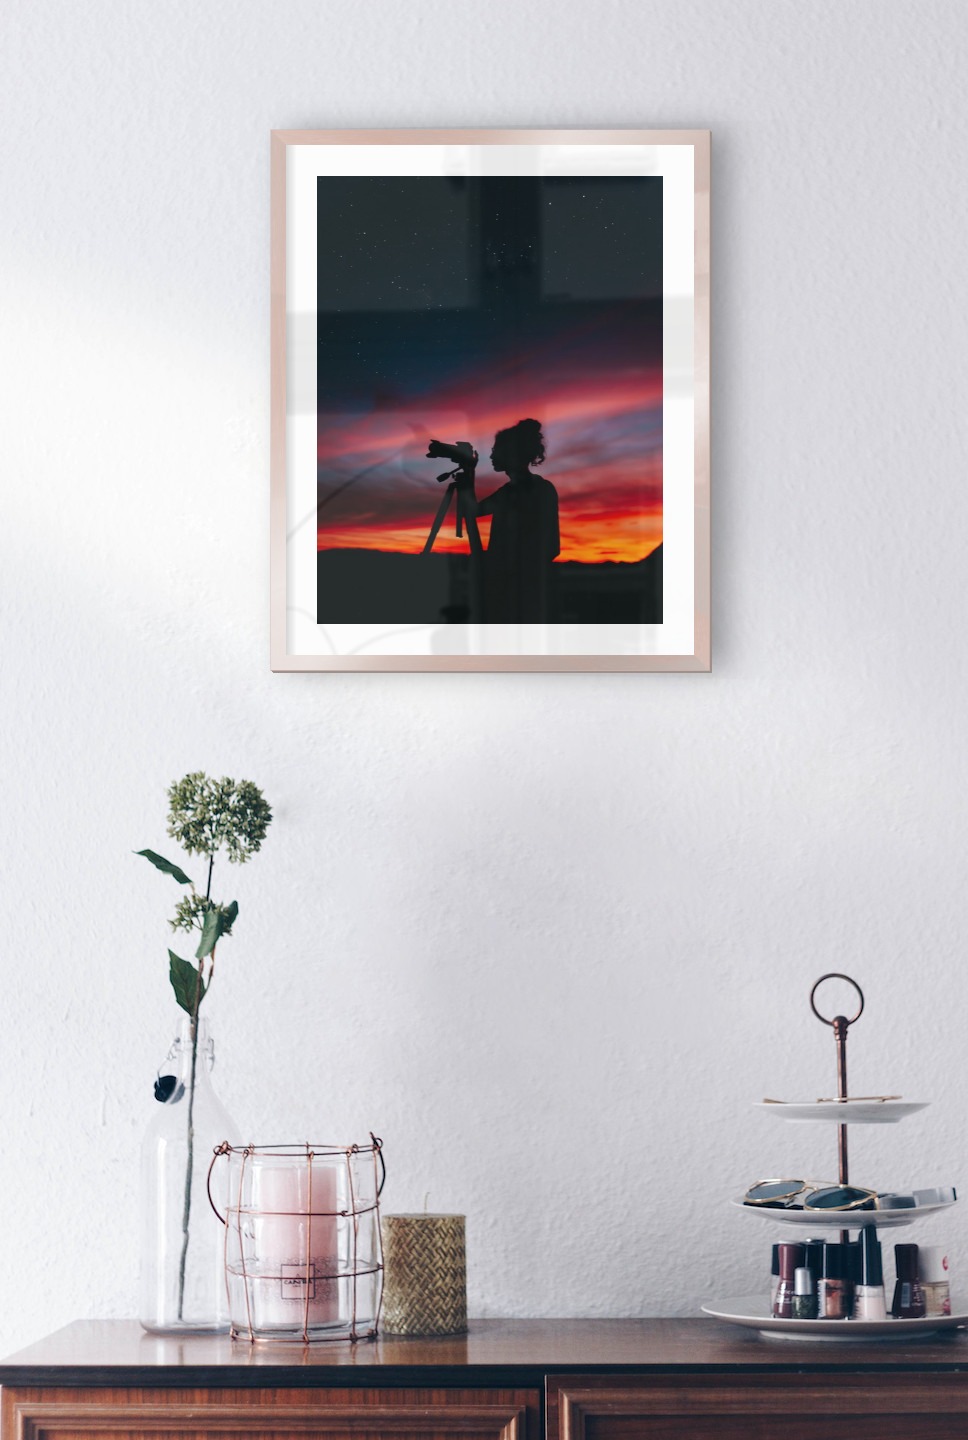 Gallery wall with picture frame in copper in size 40x50 with print "Photographer at night"